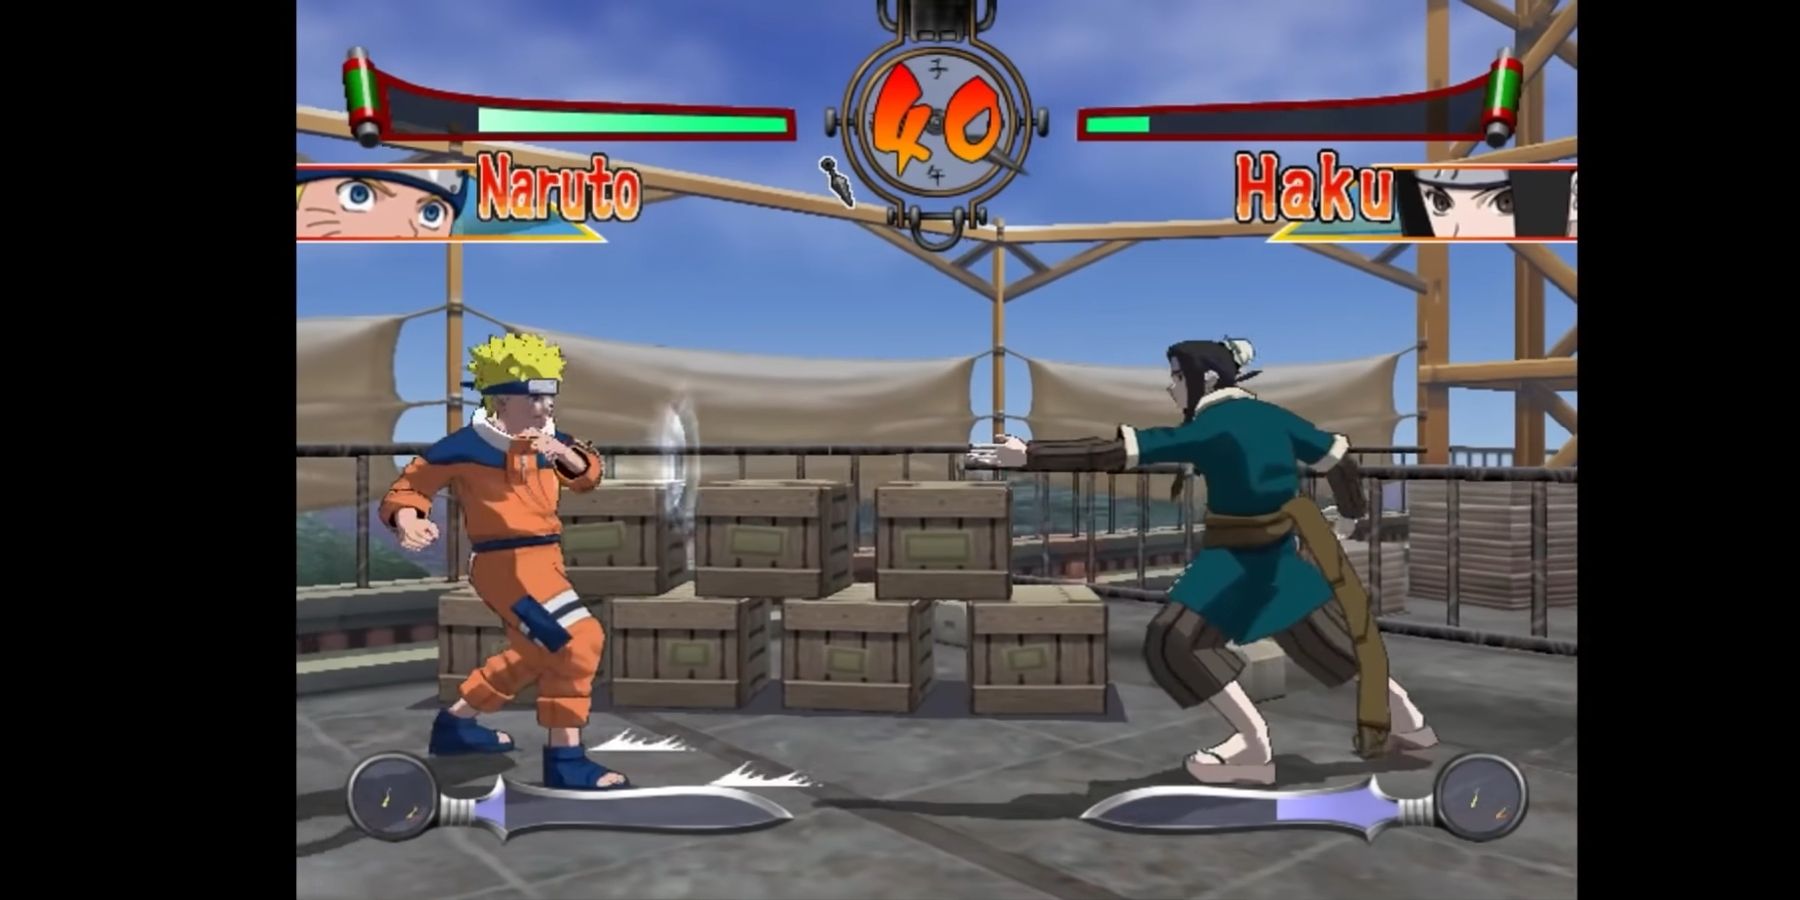 Haku throwing a needle against Naruto, who is blocking.